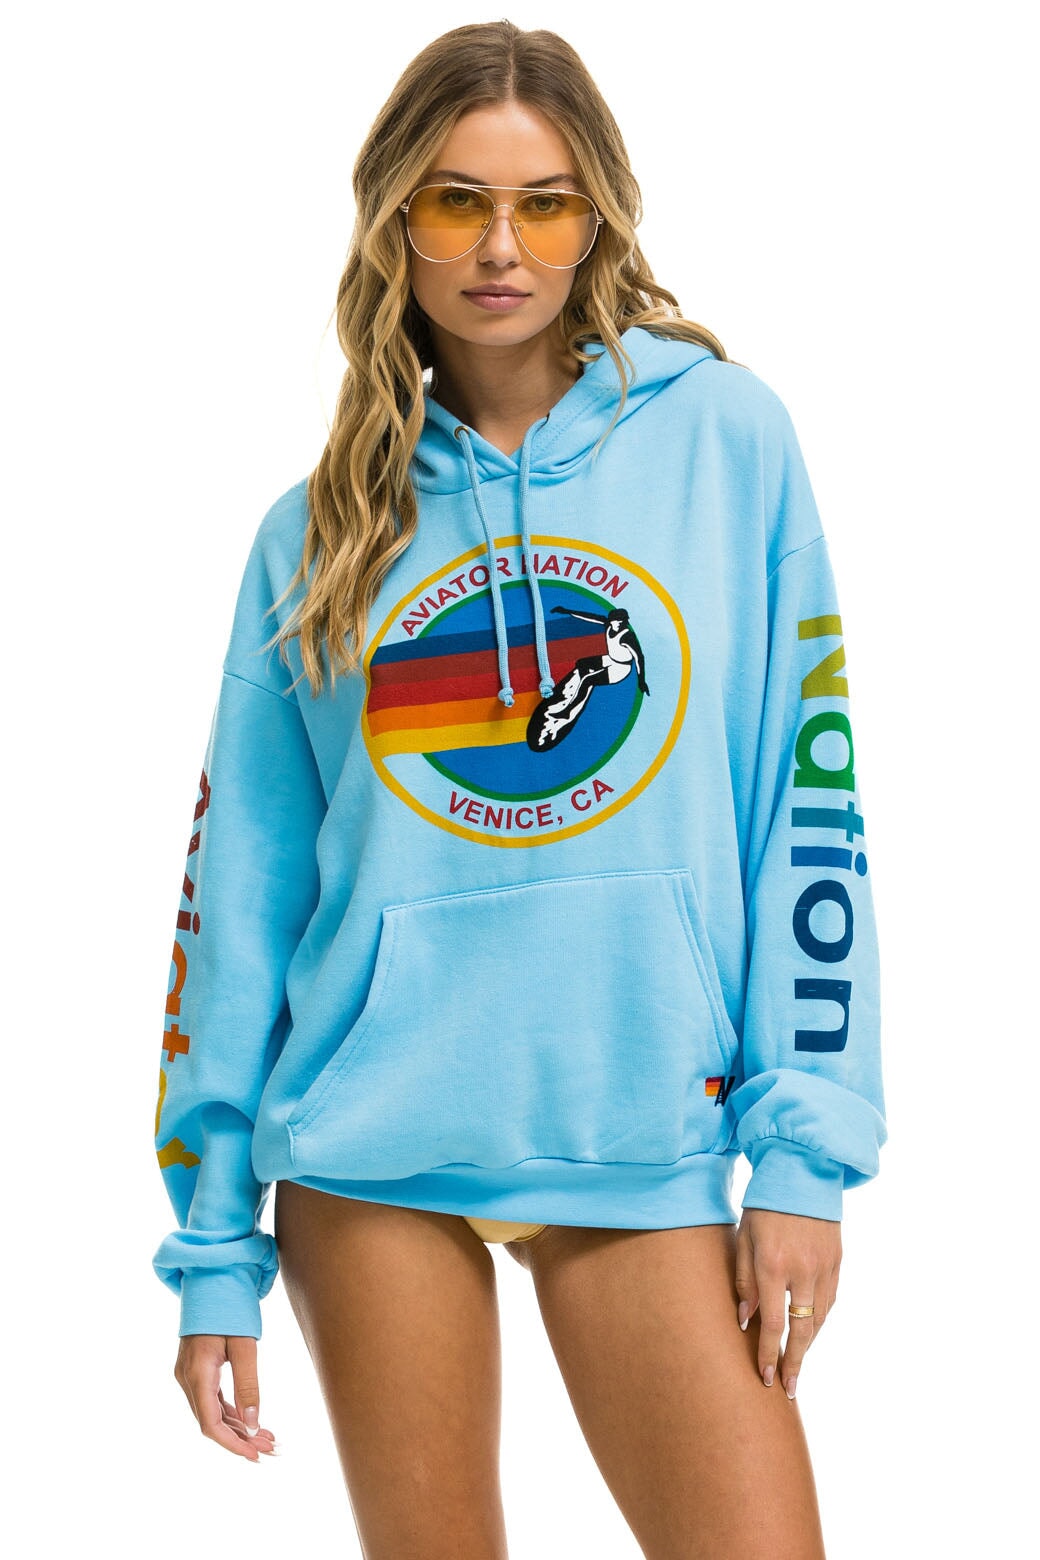 AVIATOR NATION RELAXED PULLOVER HOODIE - SKY Hoodie Aviator Nation 